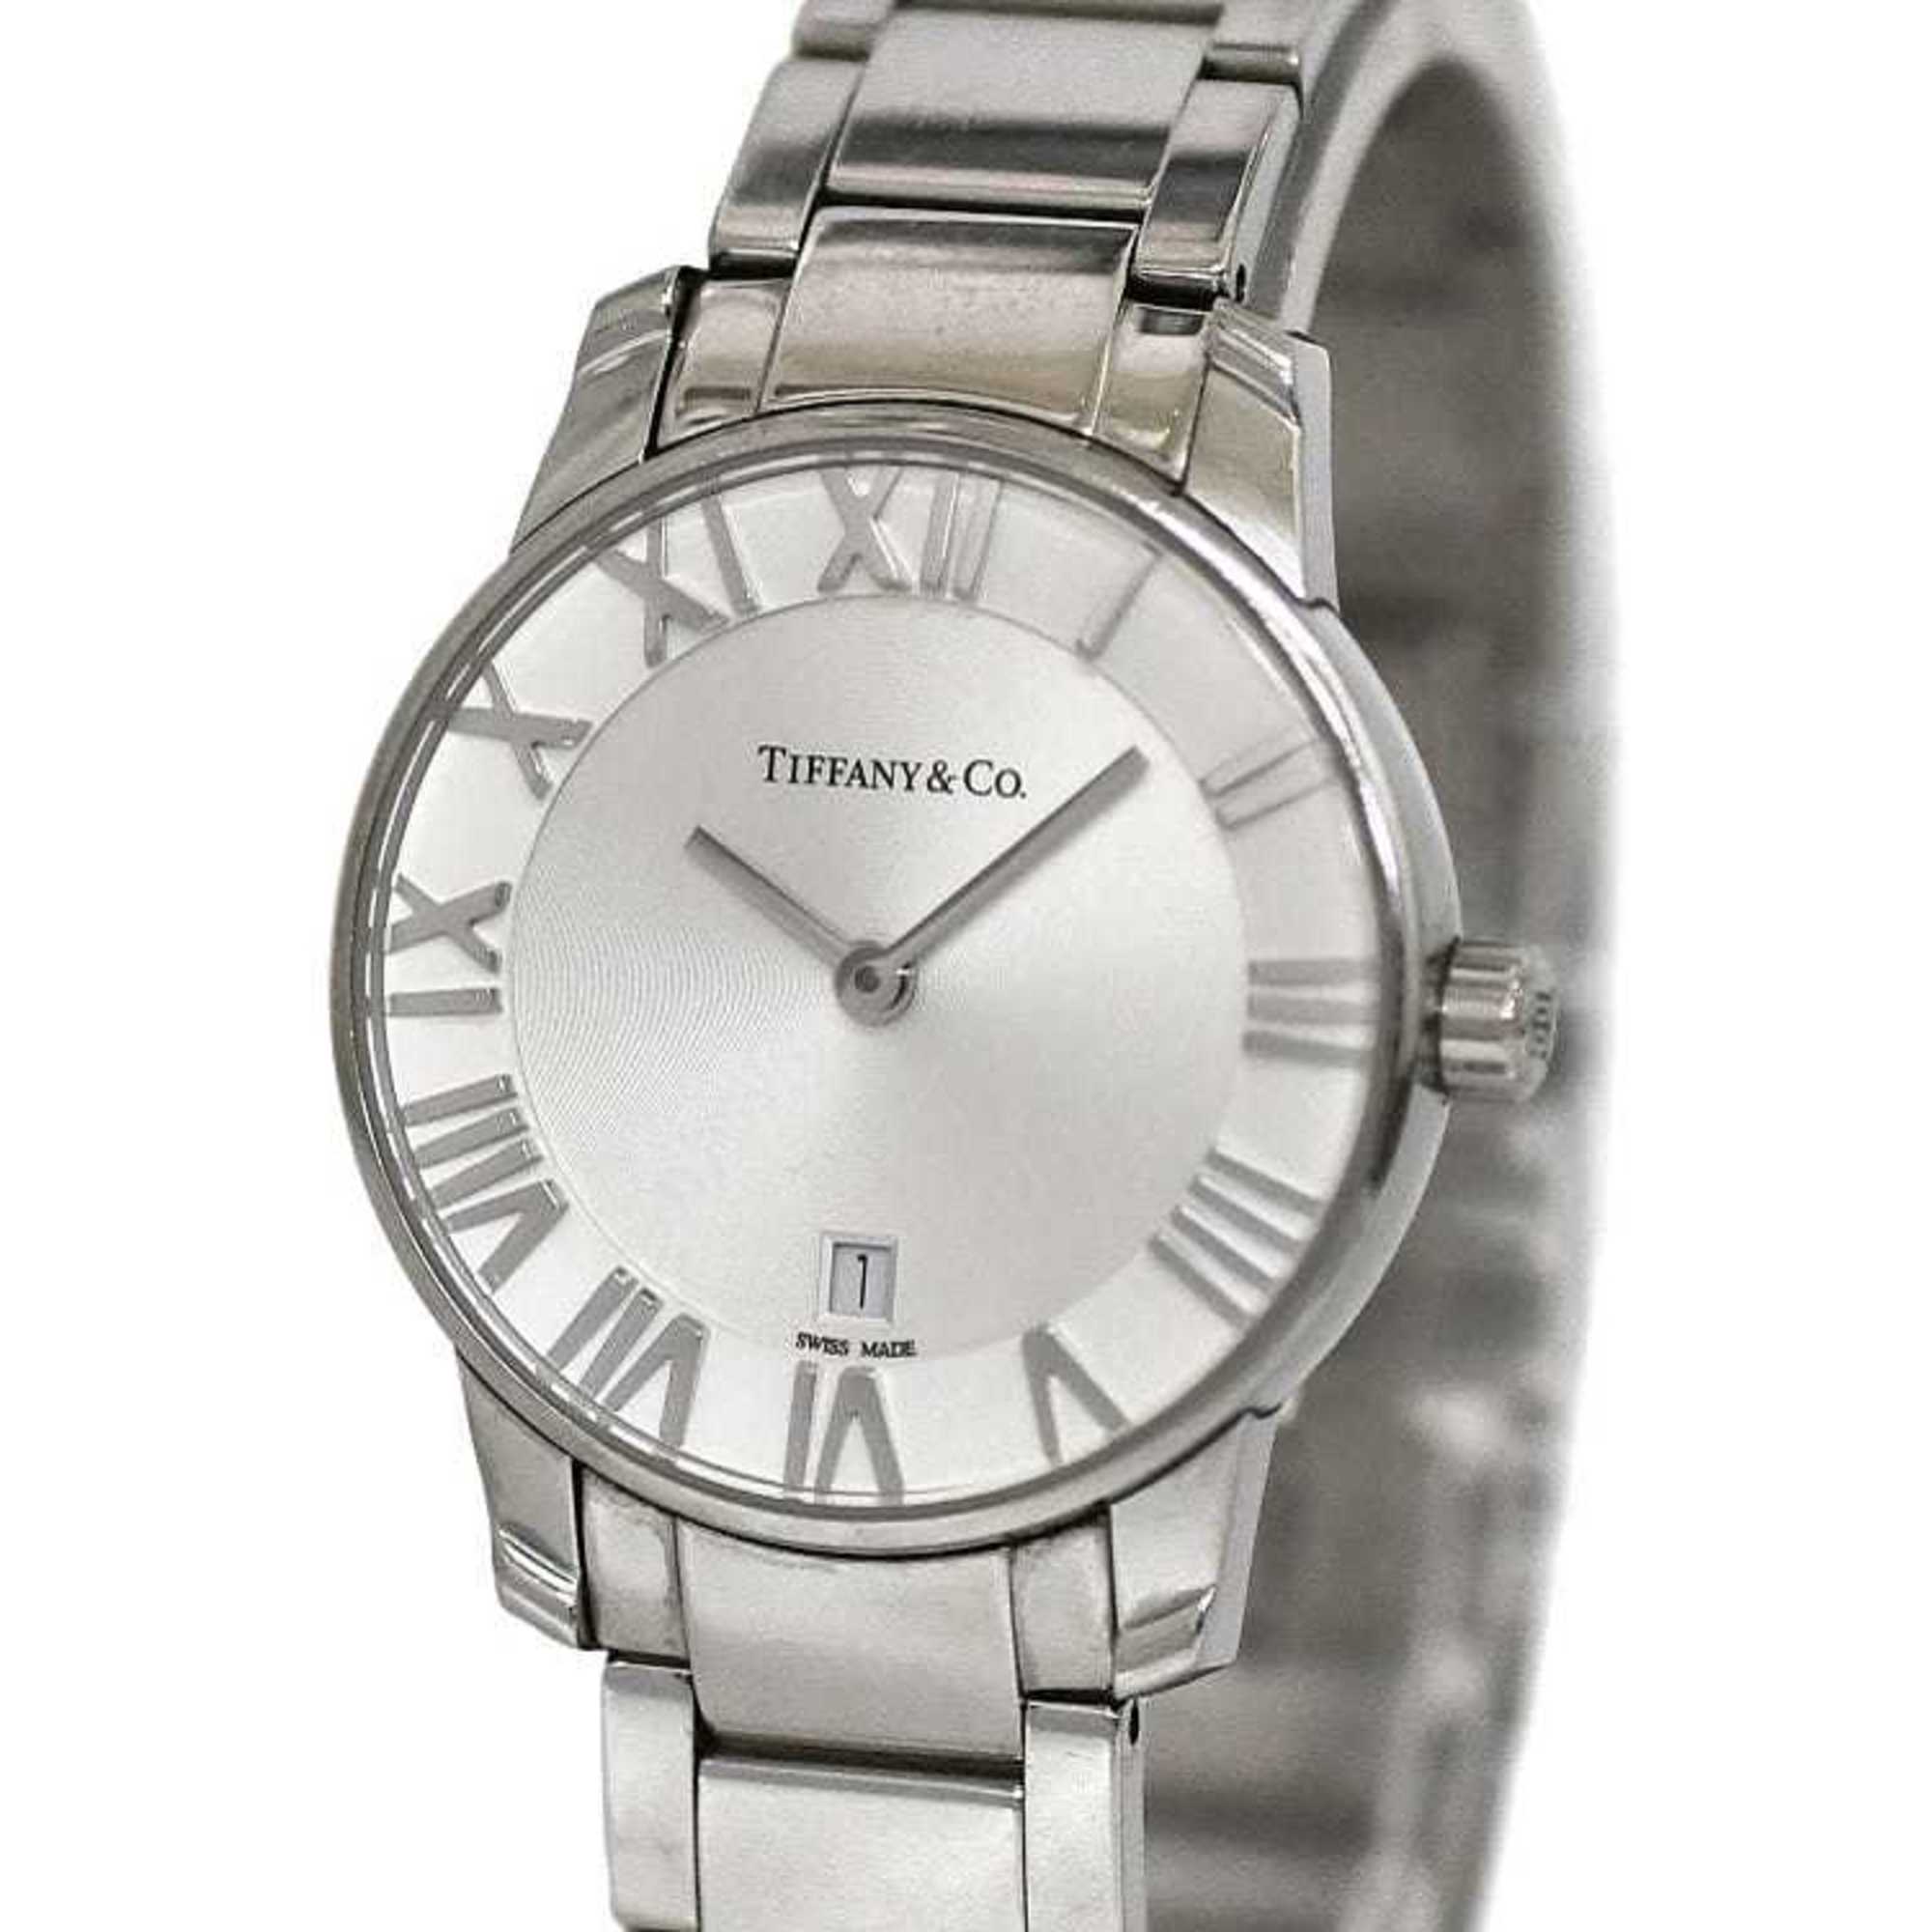 Tiffany Watch Atlas Dome Date White Silver 34875995 f-20644 Ladies SS Quartz TIFFANY&Co. 29mm Battery Operated Colored Dial Roman Numerals